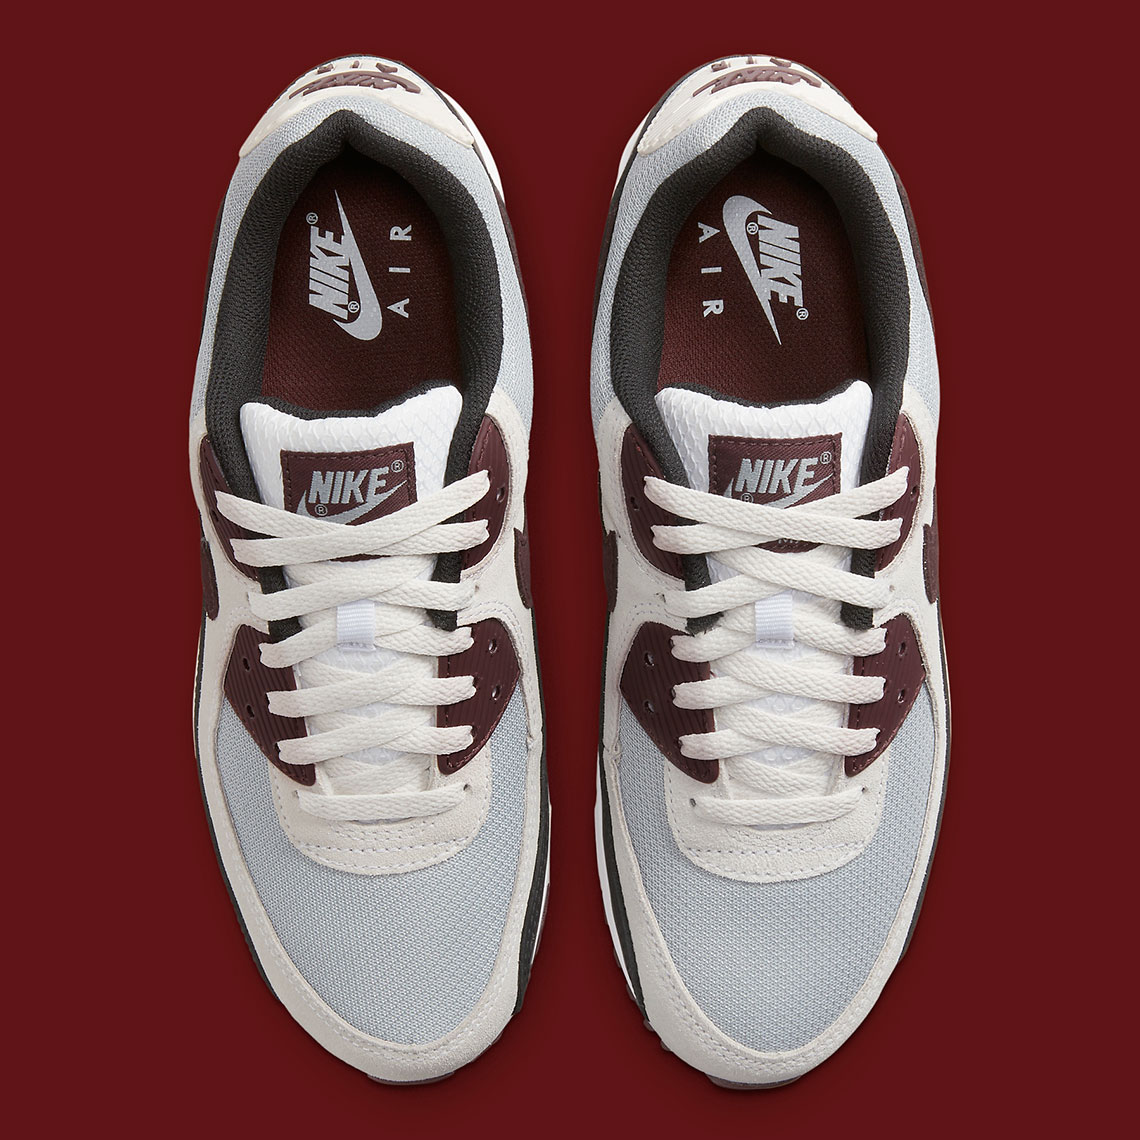 Nike Air Max 90 Appears In “Wolf Grey” And “Burgundy Crush” Colors ...